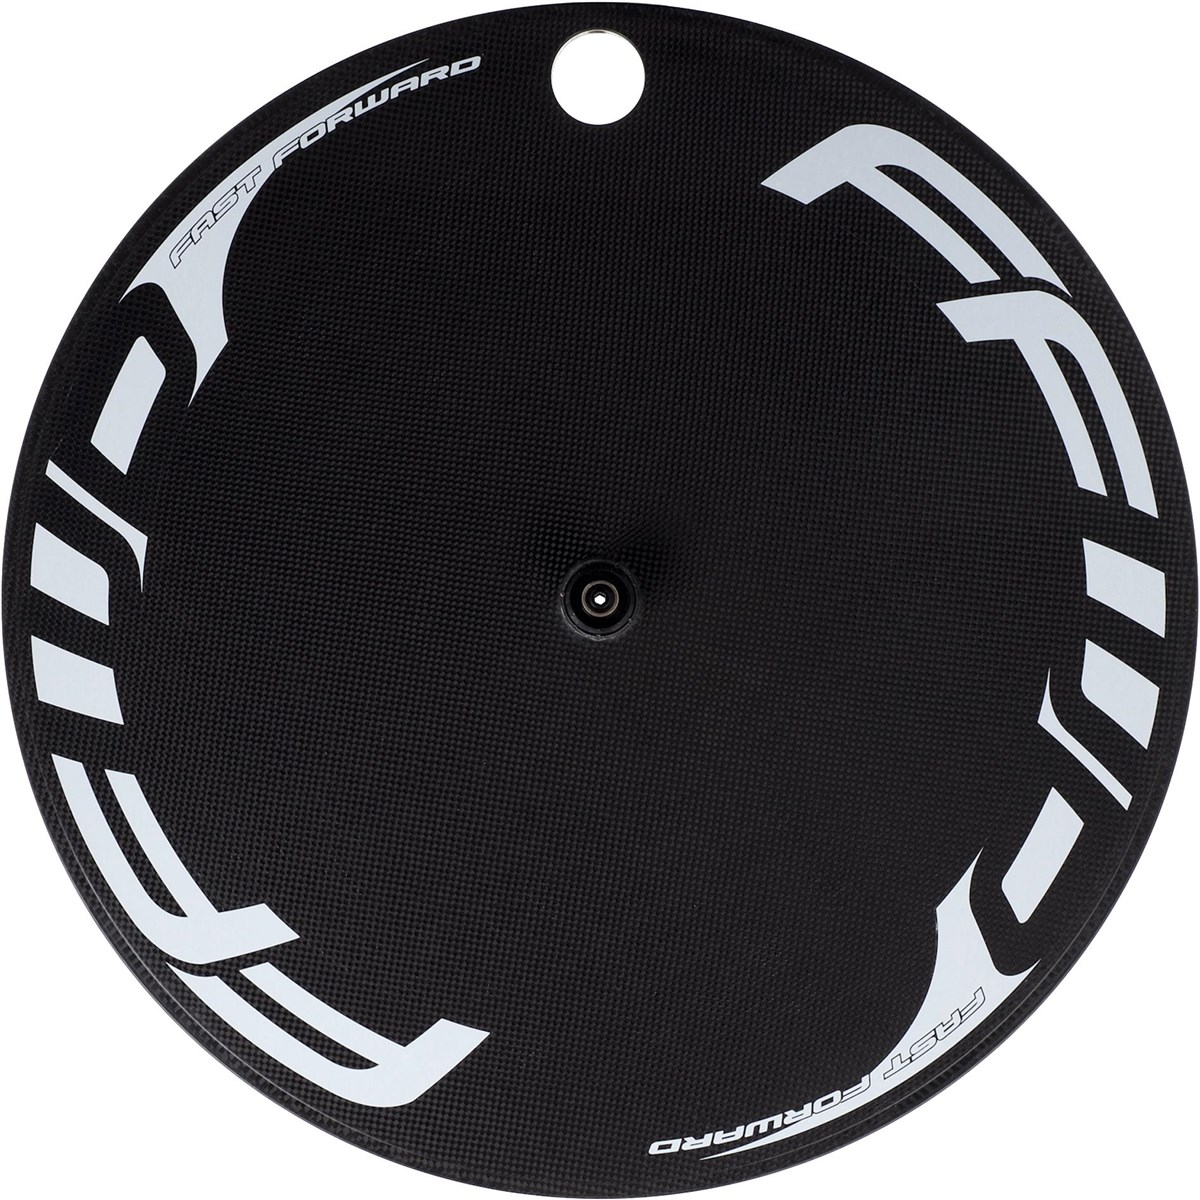 Fast Forward Disc Full Carbon Clincher Wheels product image